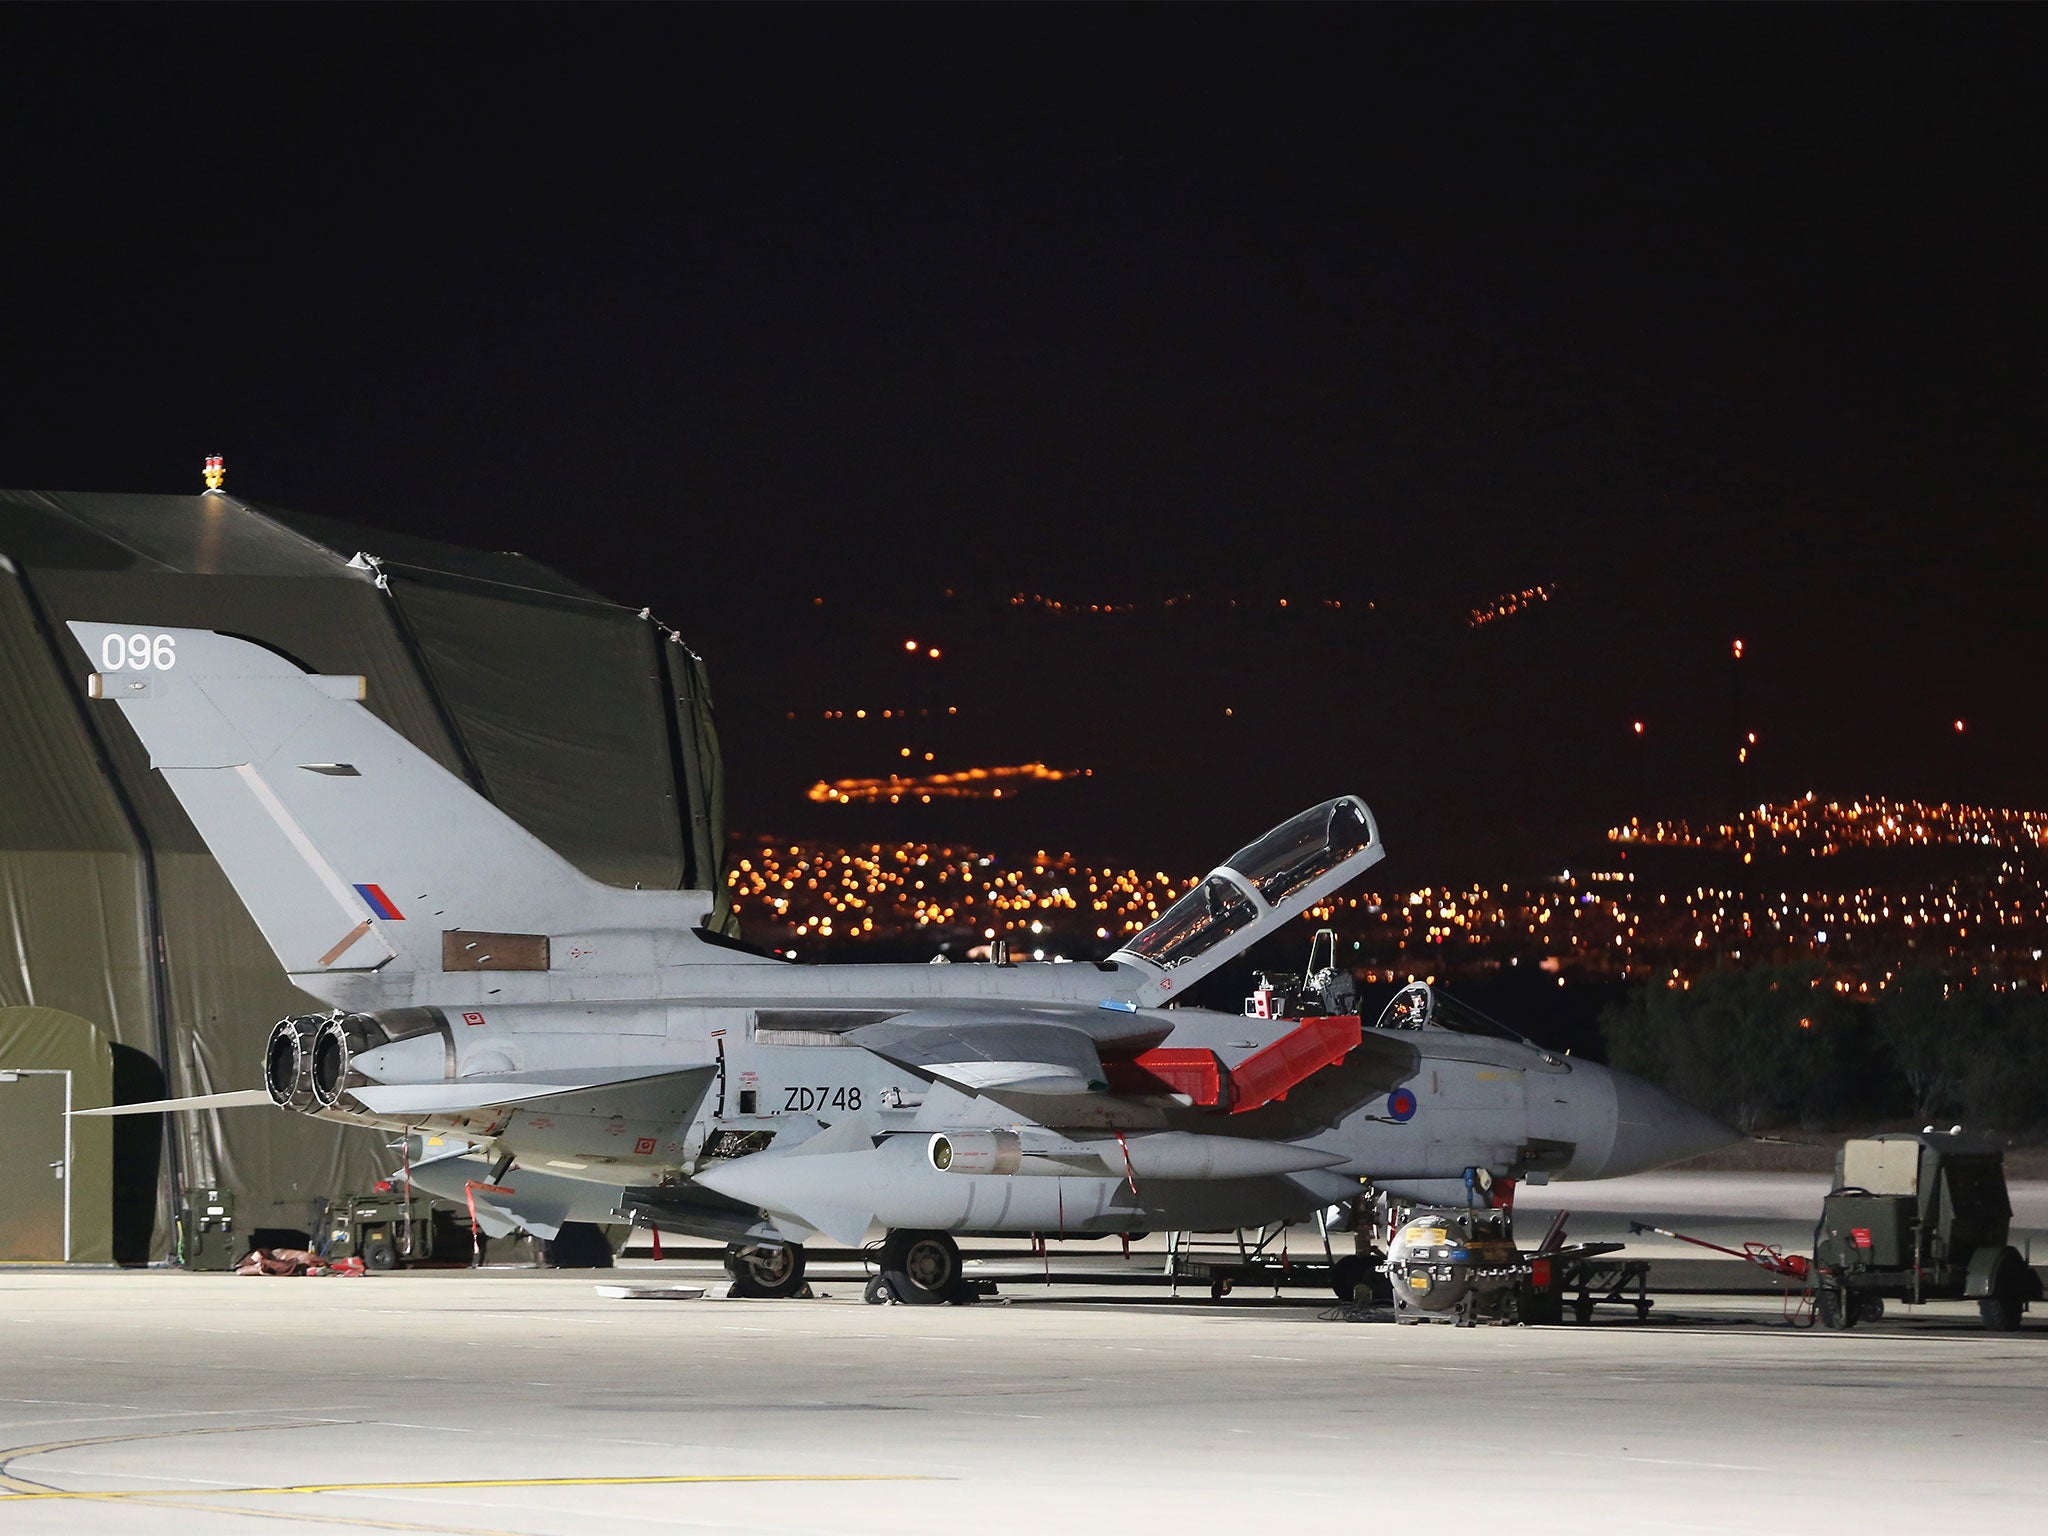 The refugees were spotted off RAF Akrotiri in Cyprus in the early hours